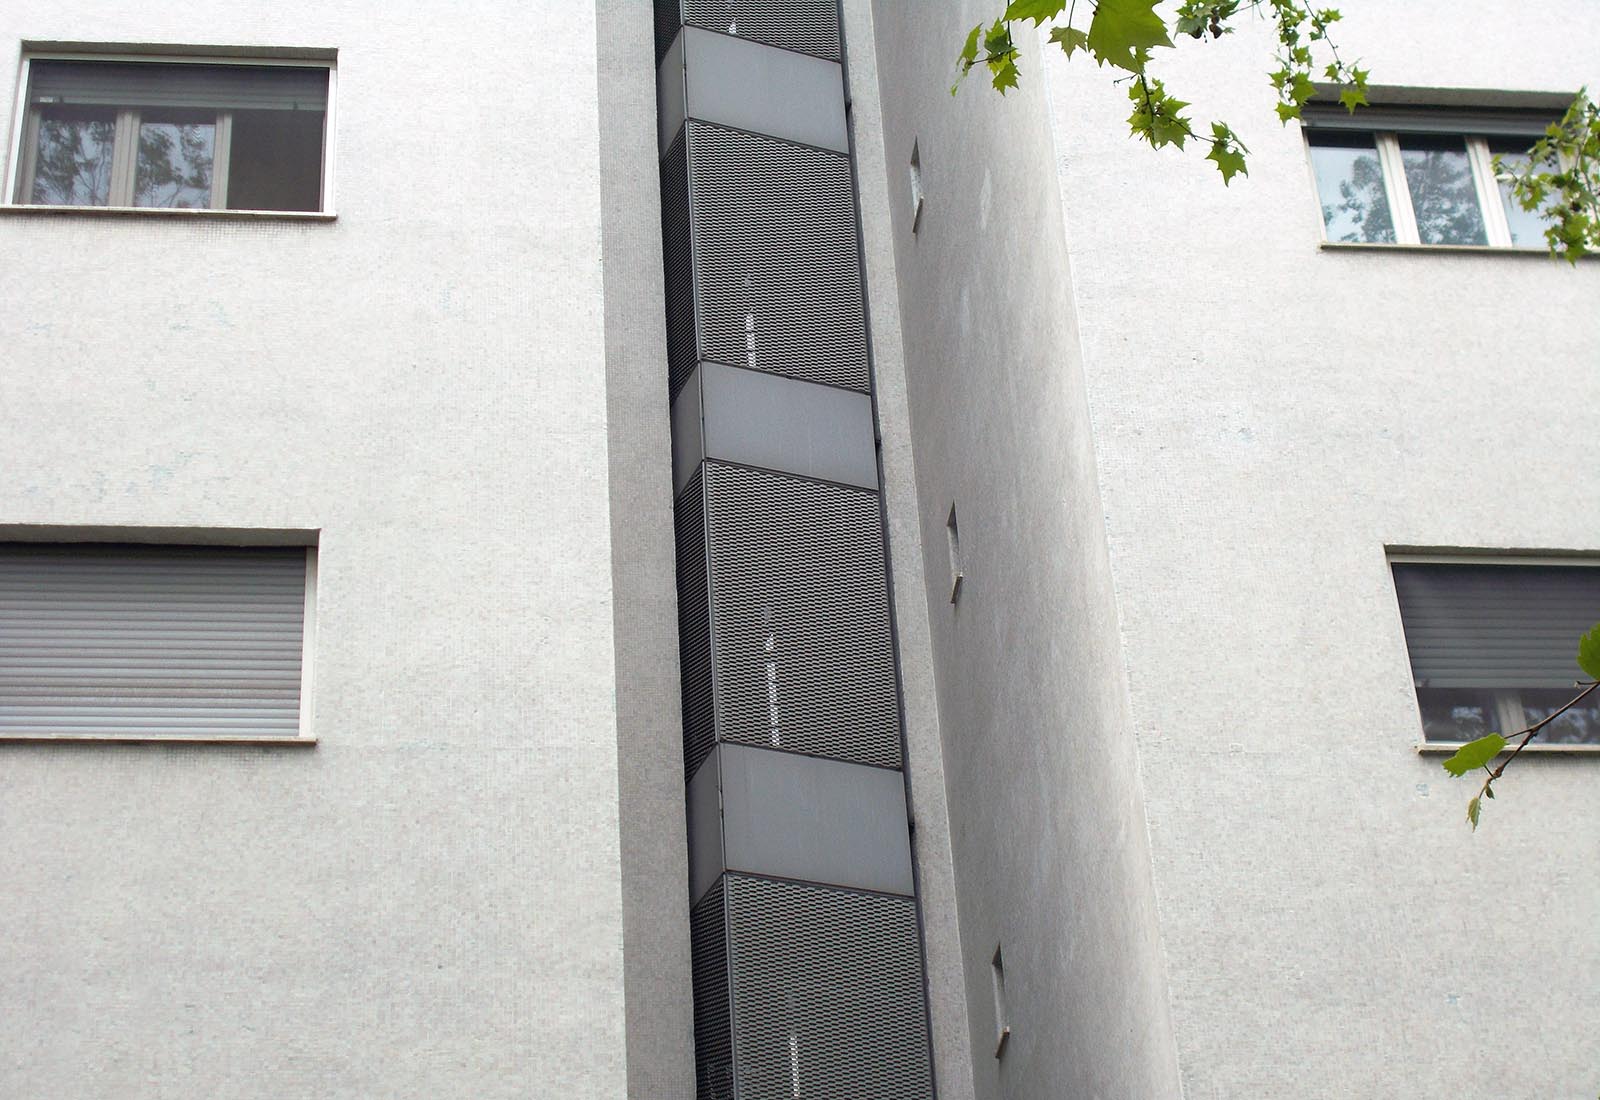 University residence in Corridoni street Milan - Detail of the new connection between the towers